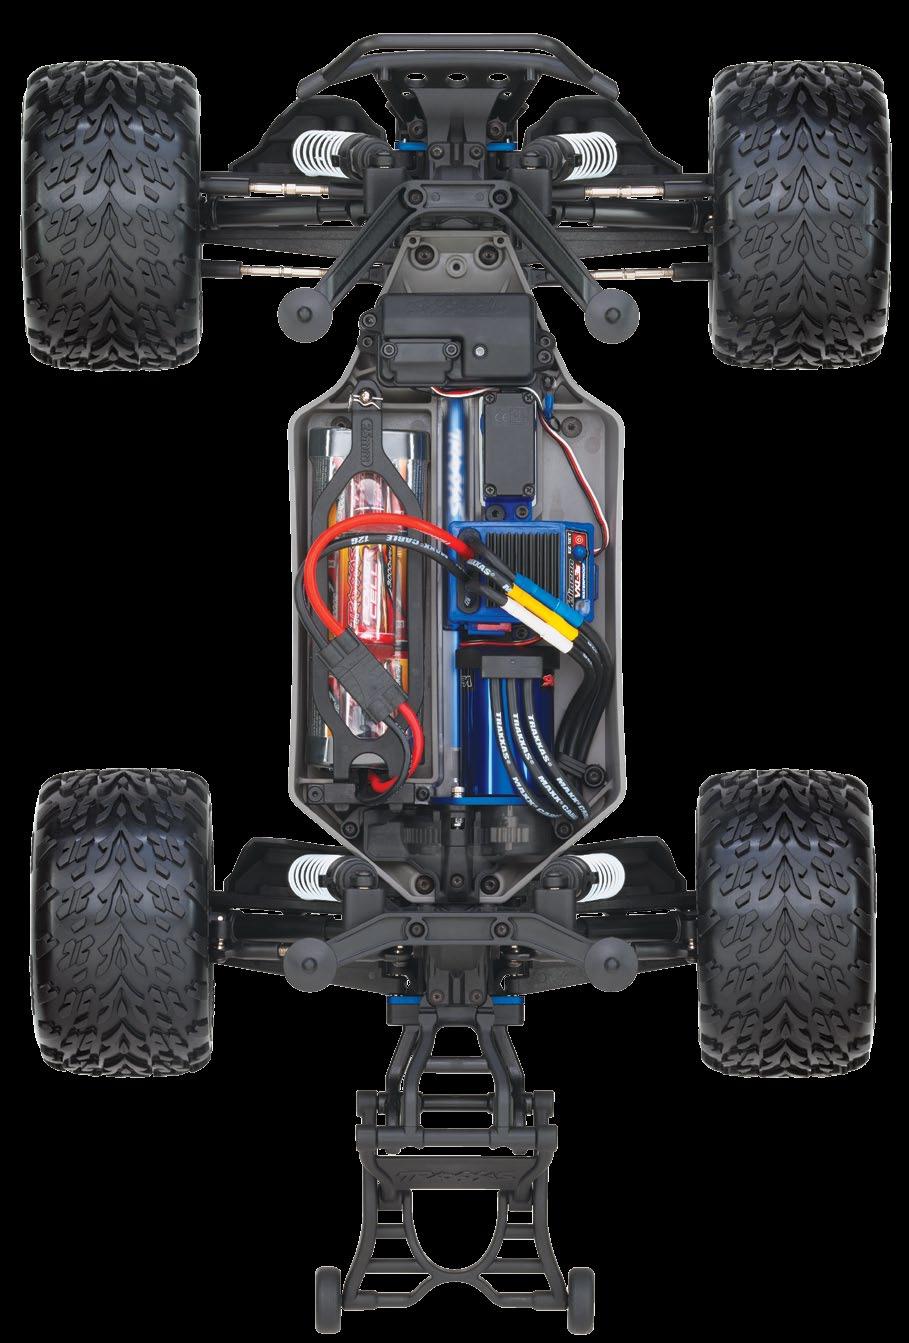 ANATOMY OF THE STAMPEDE 4X4 VXL Half Shaft Turnbuckle (Rear Camber Link) Battery Compartment Battery Hold-Down Battery Front Body Mount Chassis